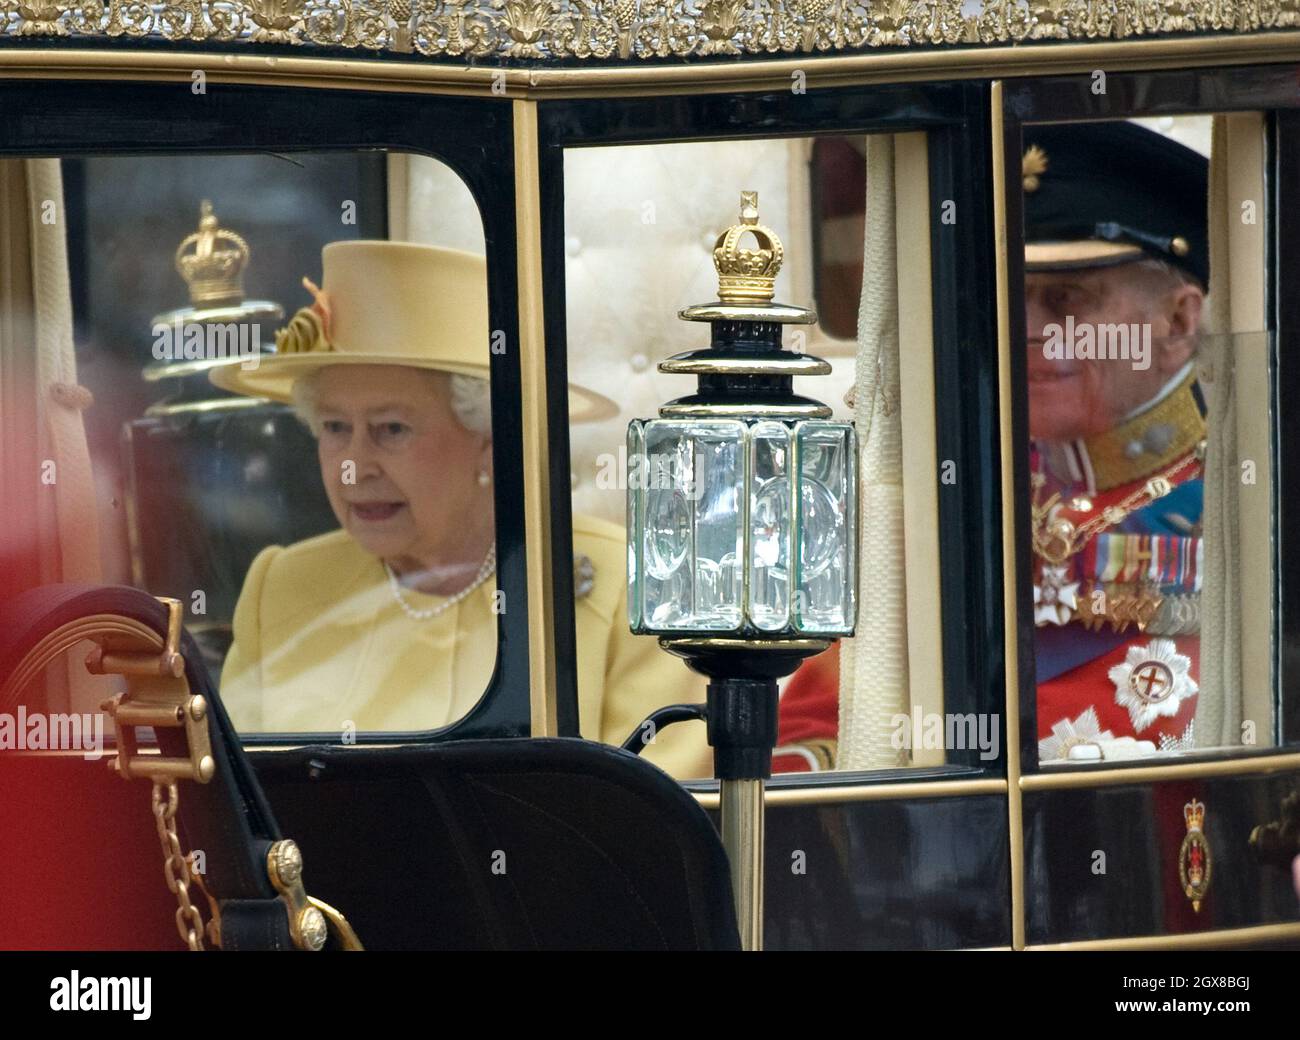 Queen Elizabeth ll and Prince Philip, Duke of Edinburgh leave following the Wedding of Prince William and Catherine Middleton at Westminster Abbey on April 29, 2011. Stock Photo